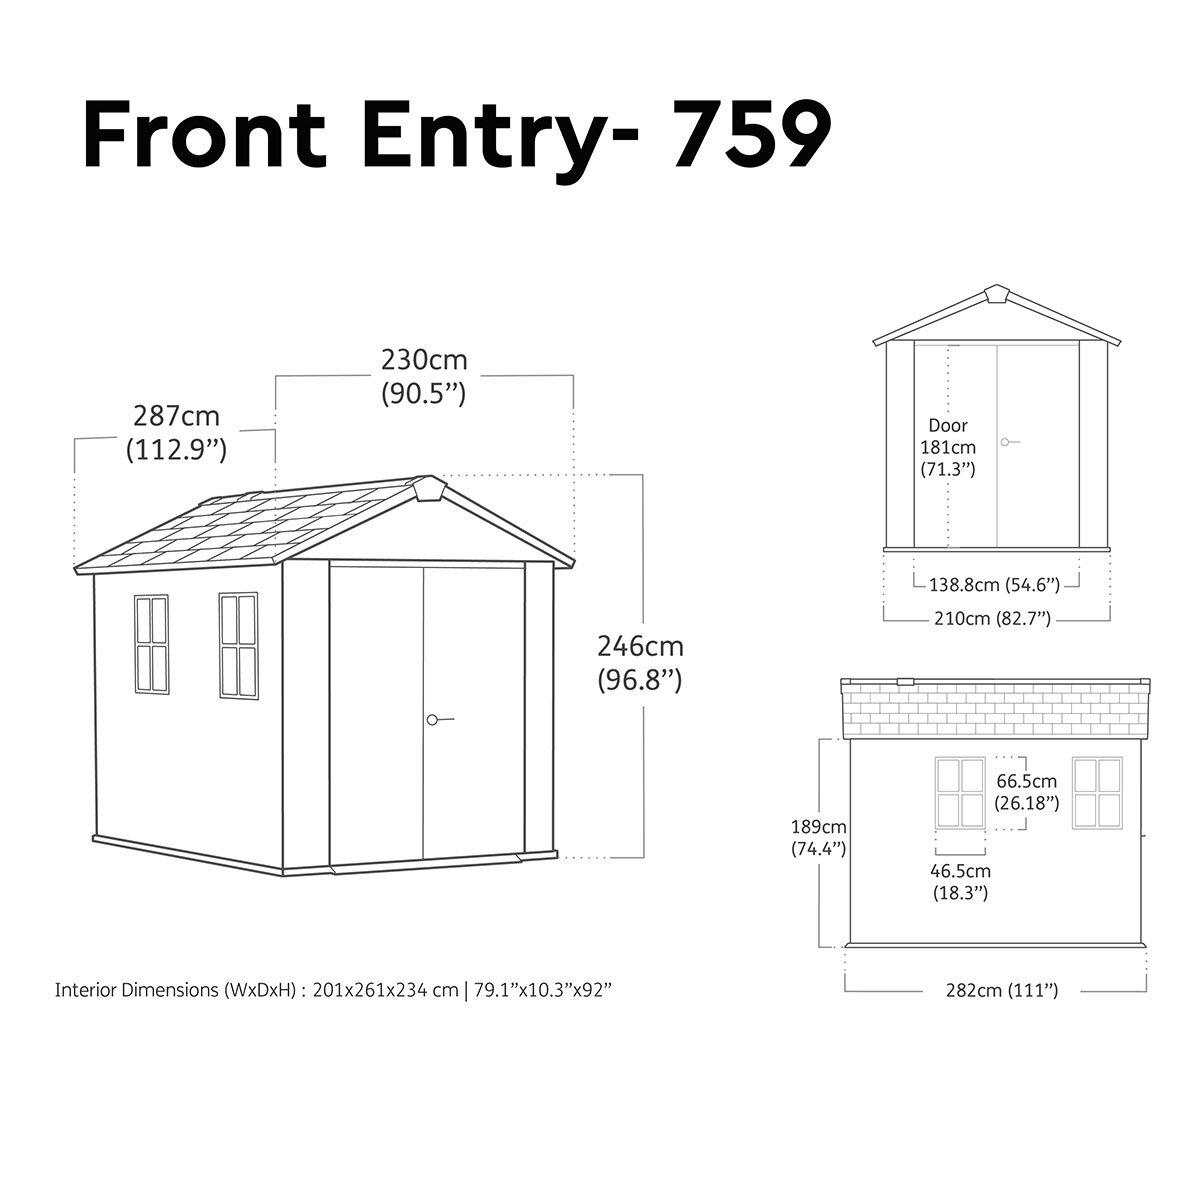 Keter Newton Plus 9ft 5" x 7ft 6" (2.9 x 2.3m) Storage Shed in 2 Configurations